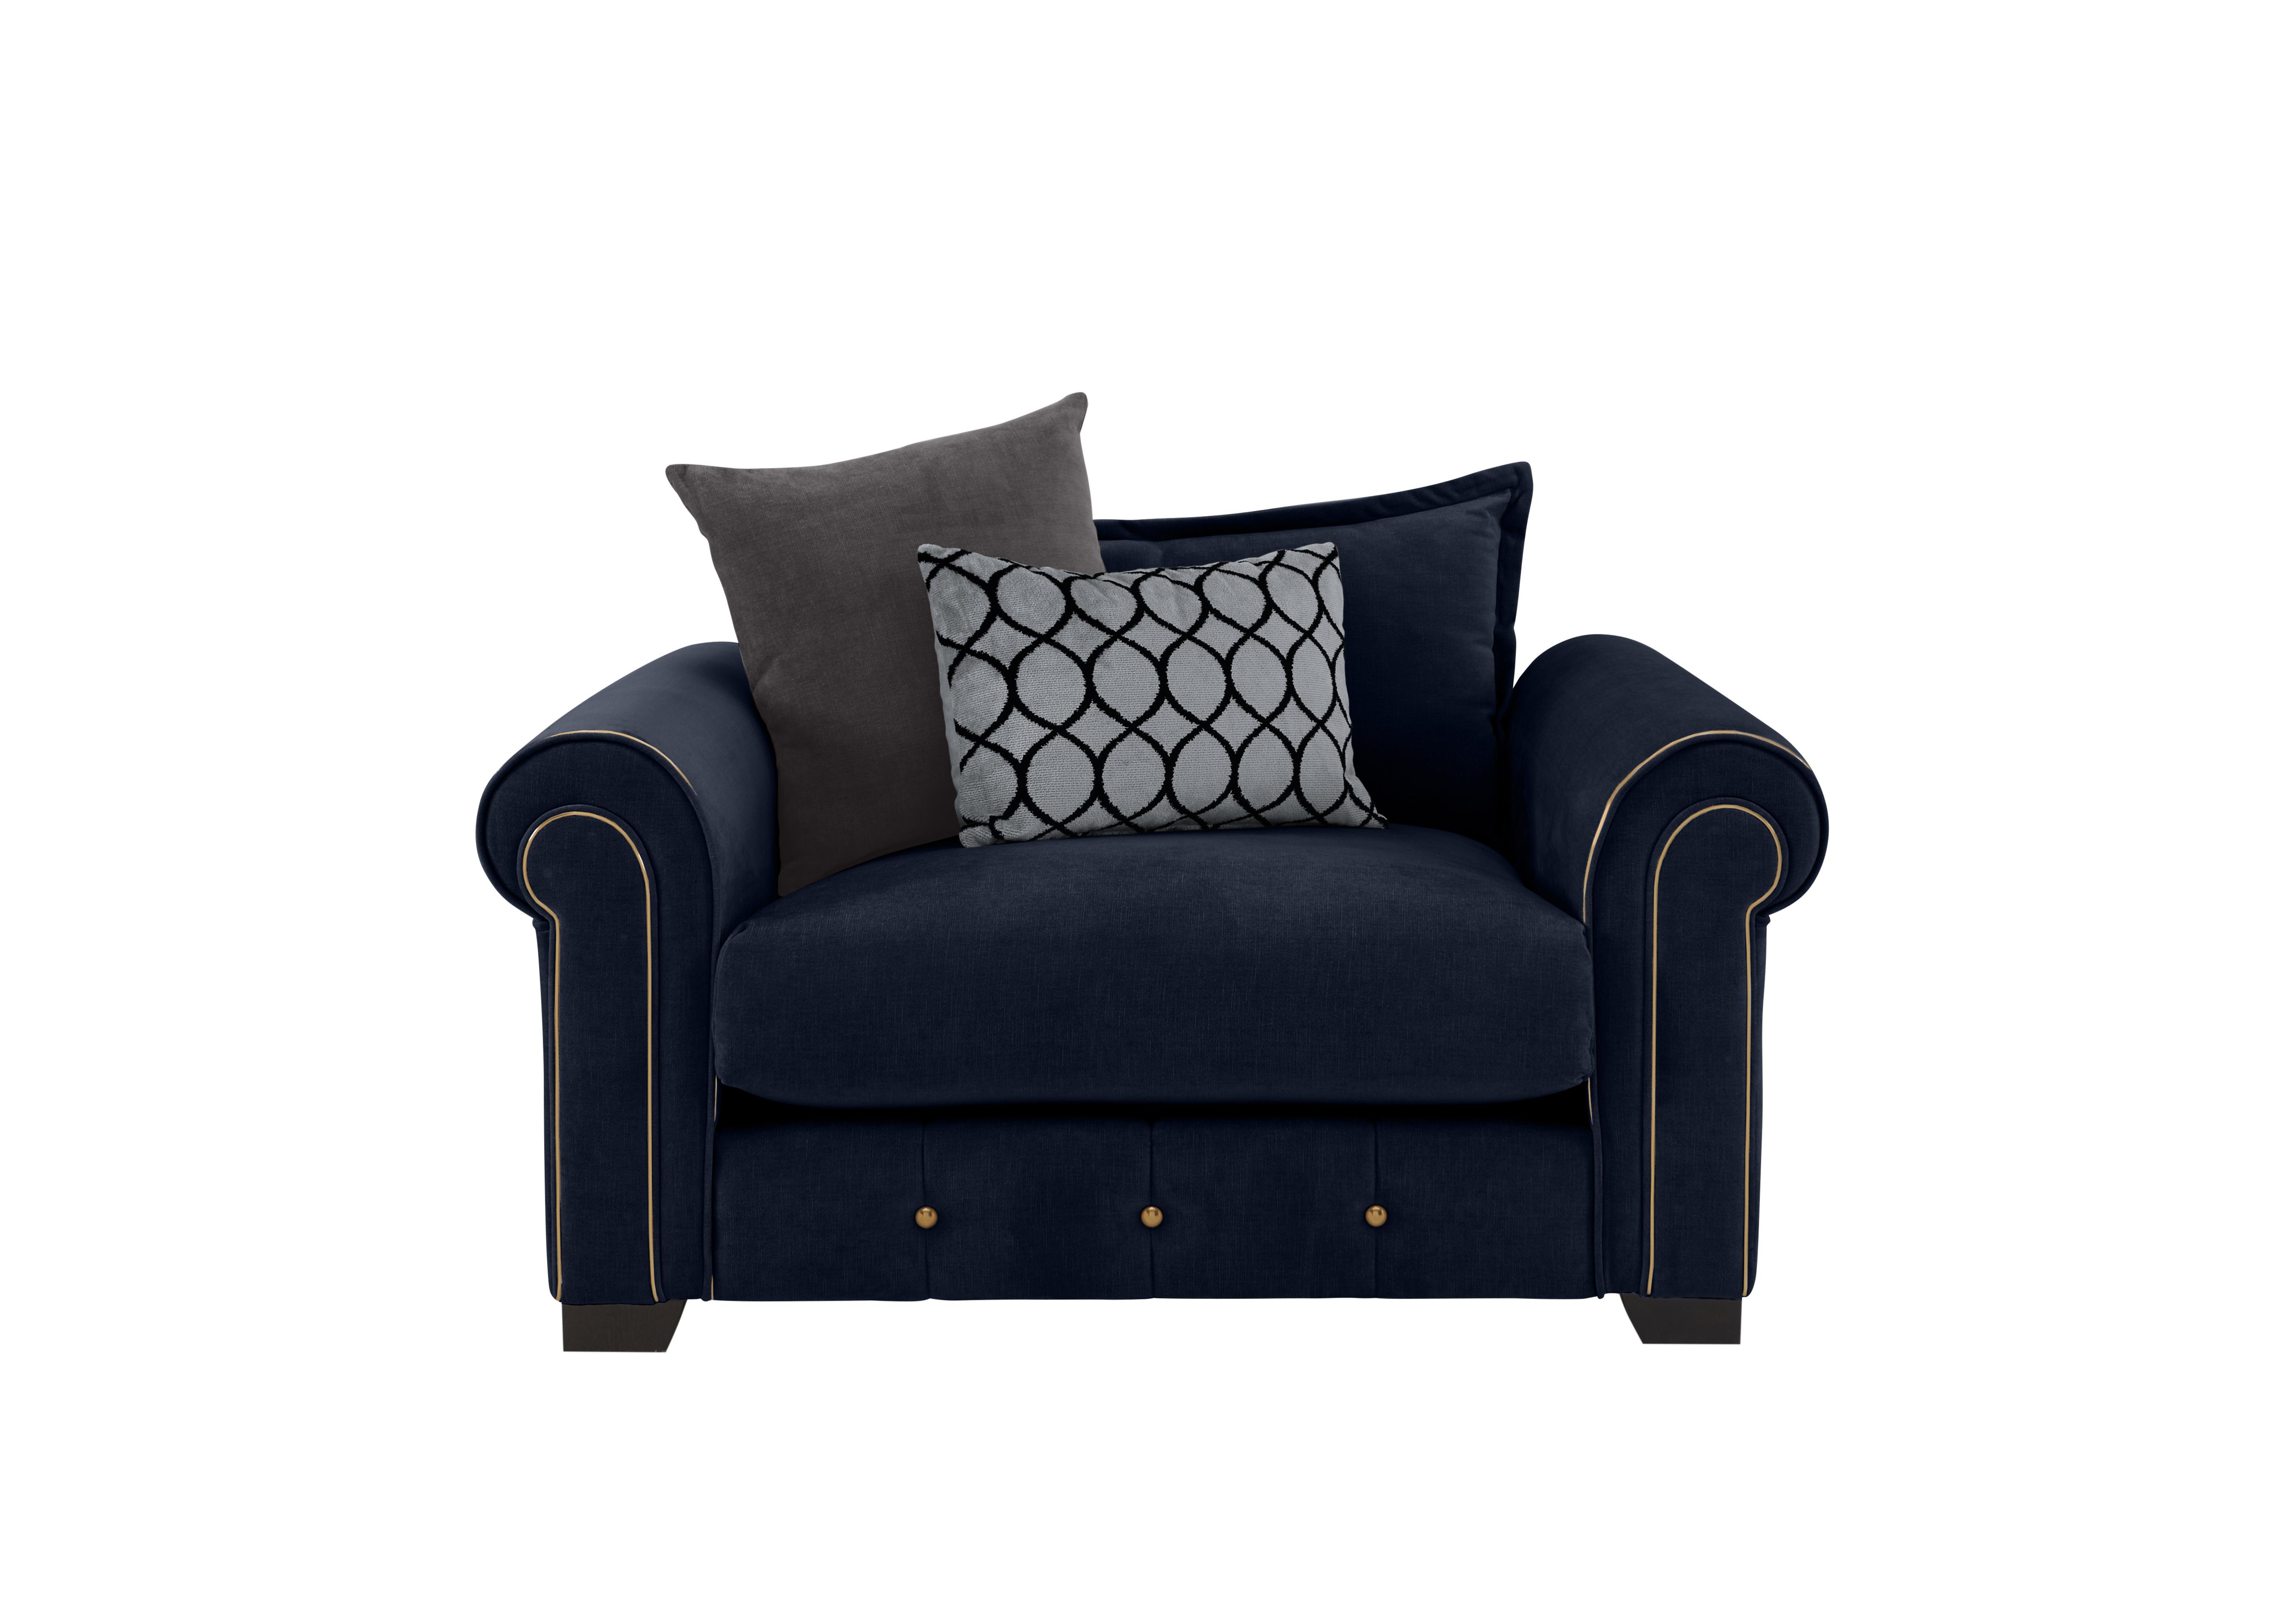 Sumptuous Fabric Snuggler Chair in Chamonix Navy Dk/Gold on Furniture Village